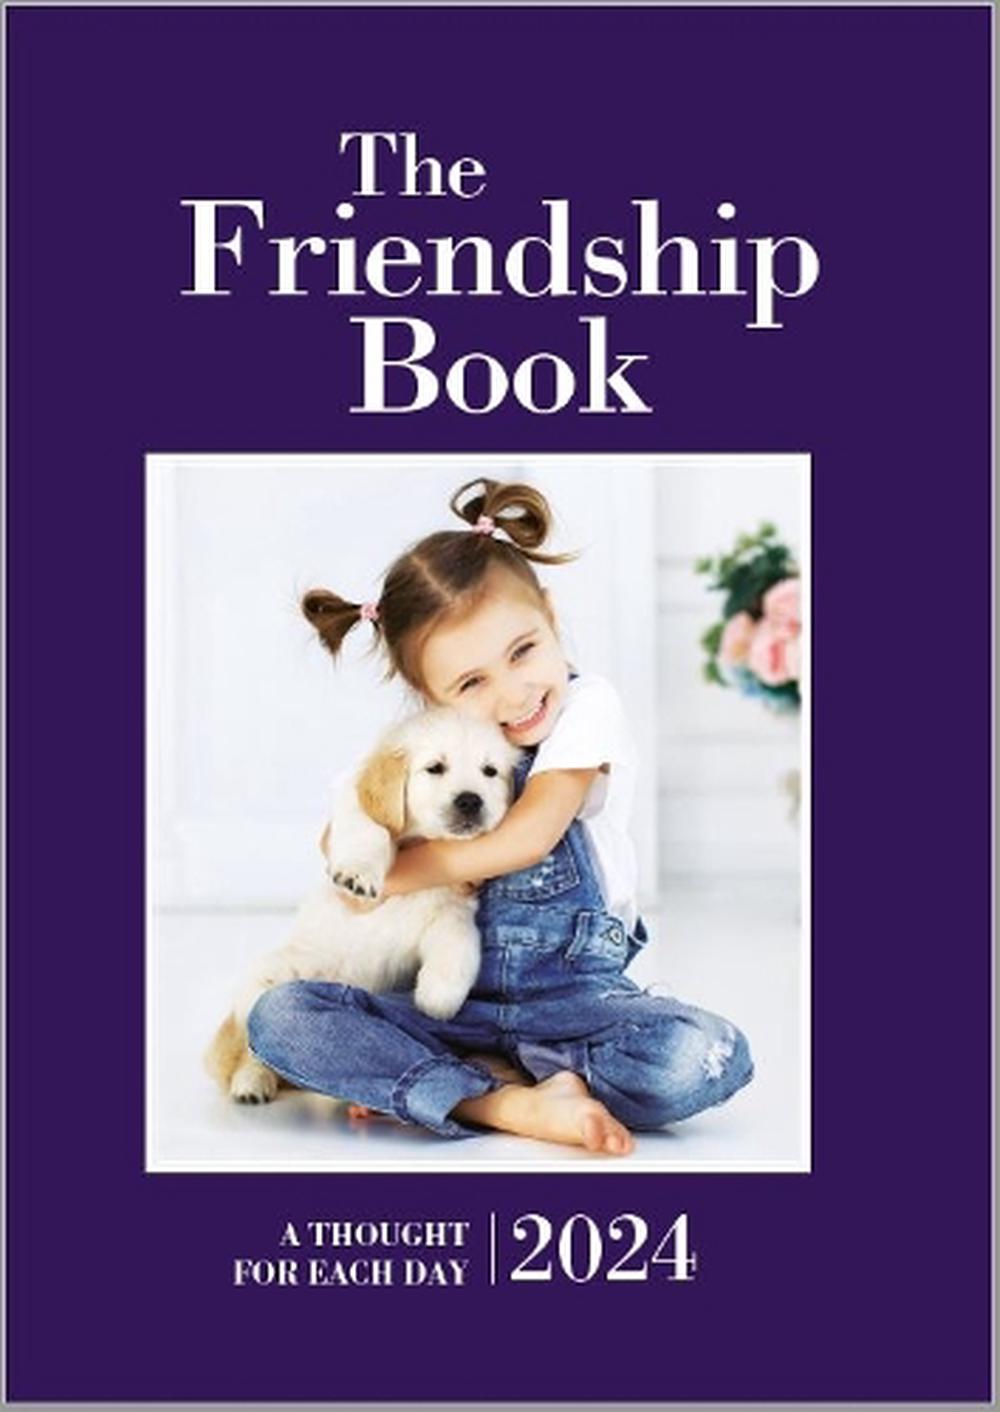 The Friendship Book 2024 by DC Thomson, Hardcover, 9781845359539 Buy